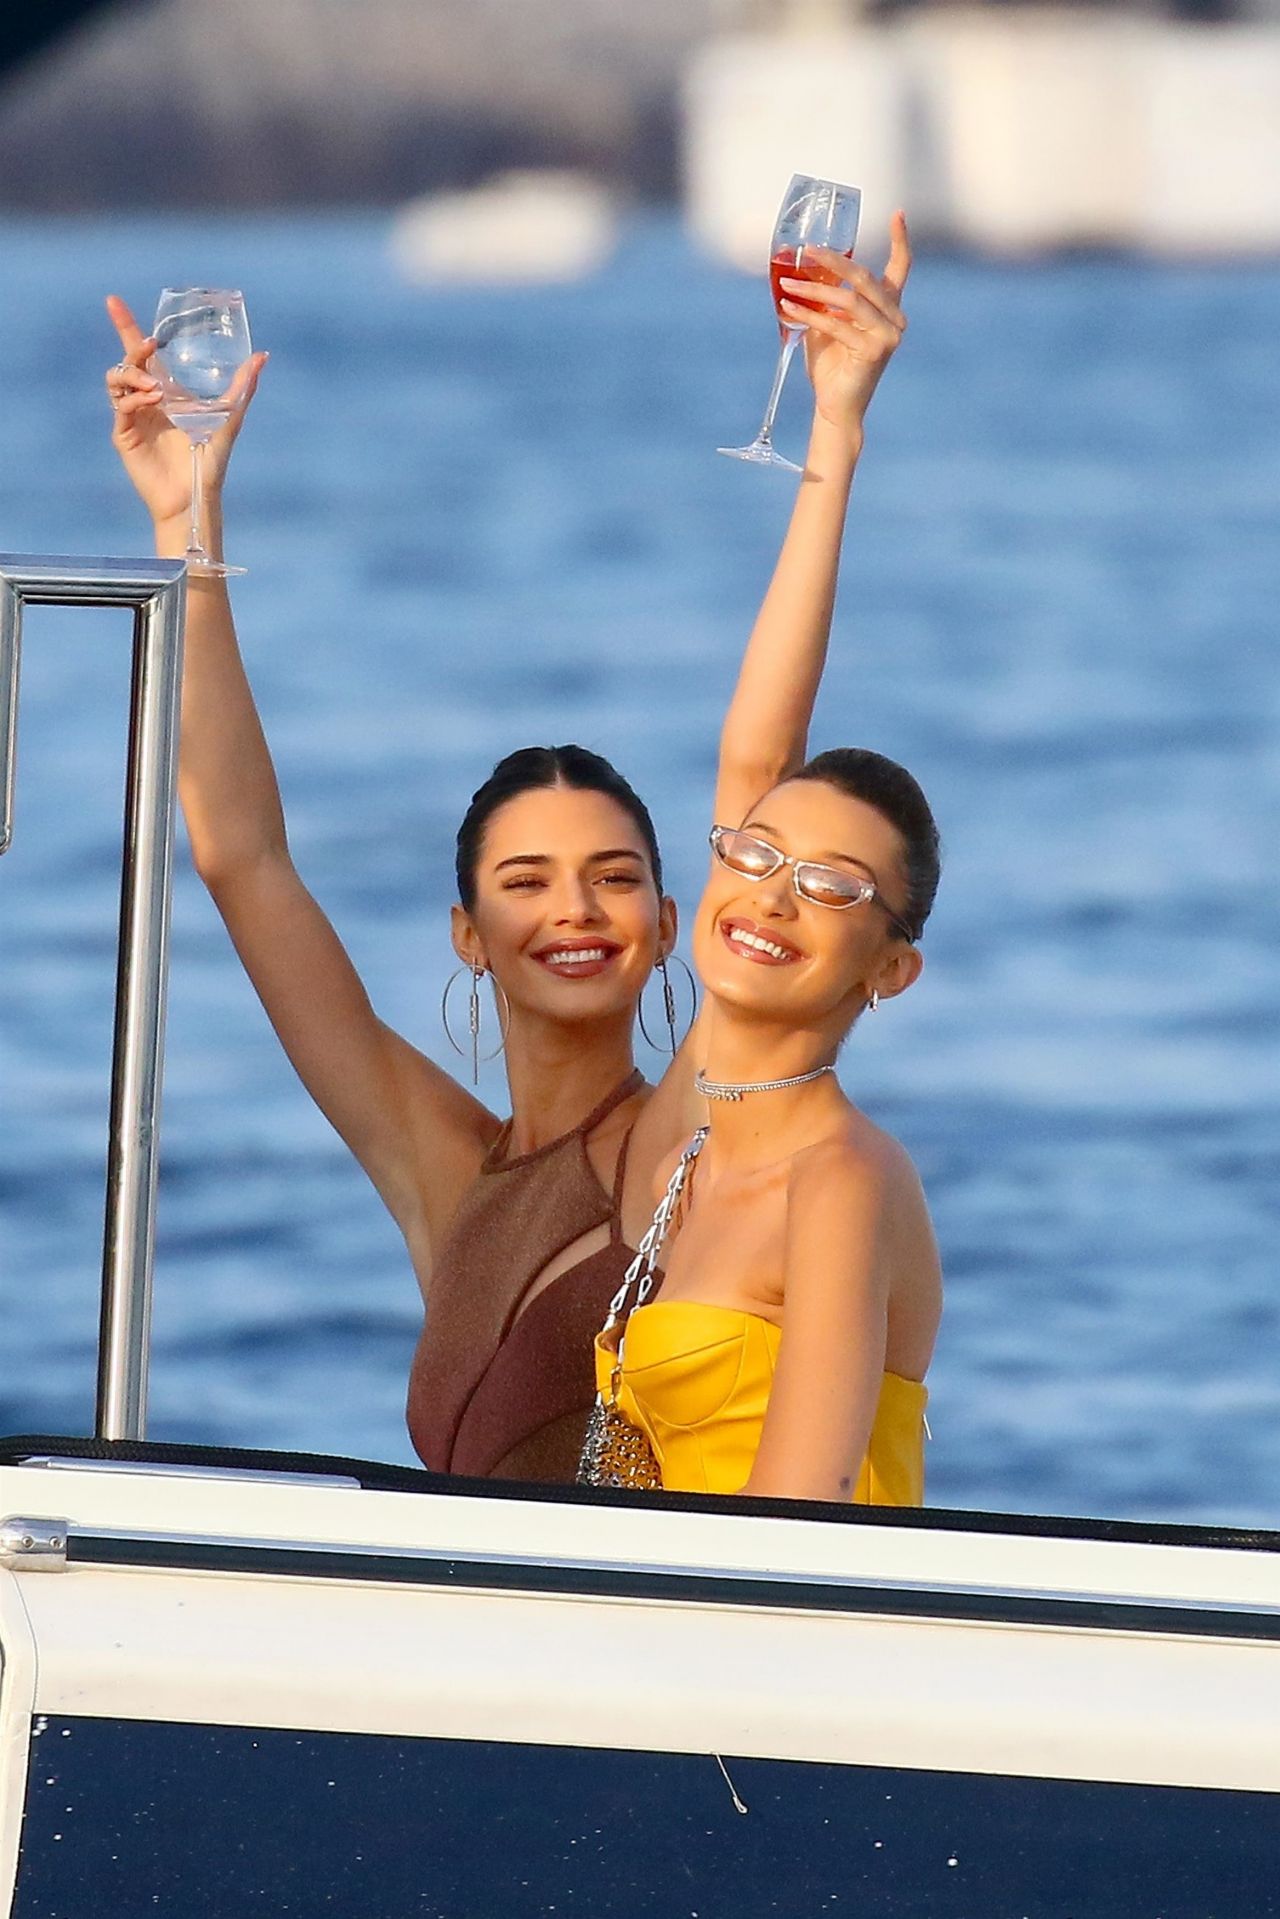 bella-hadid-and-kendall-jenner-tommy-hilfigers-yacht-in-monaco-05-25-2019-7.jpg